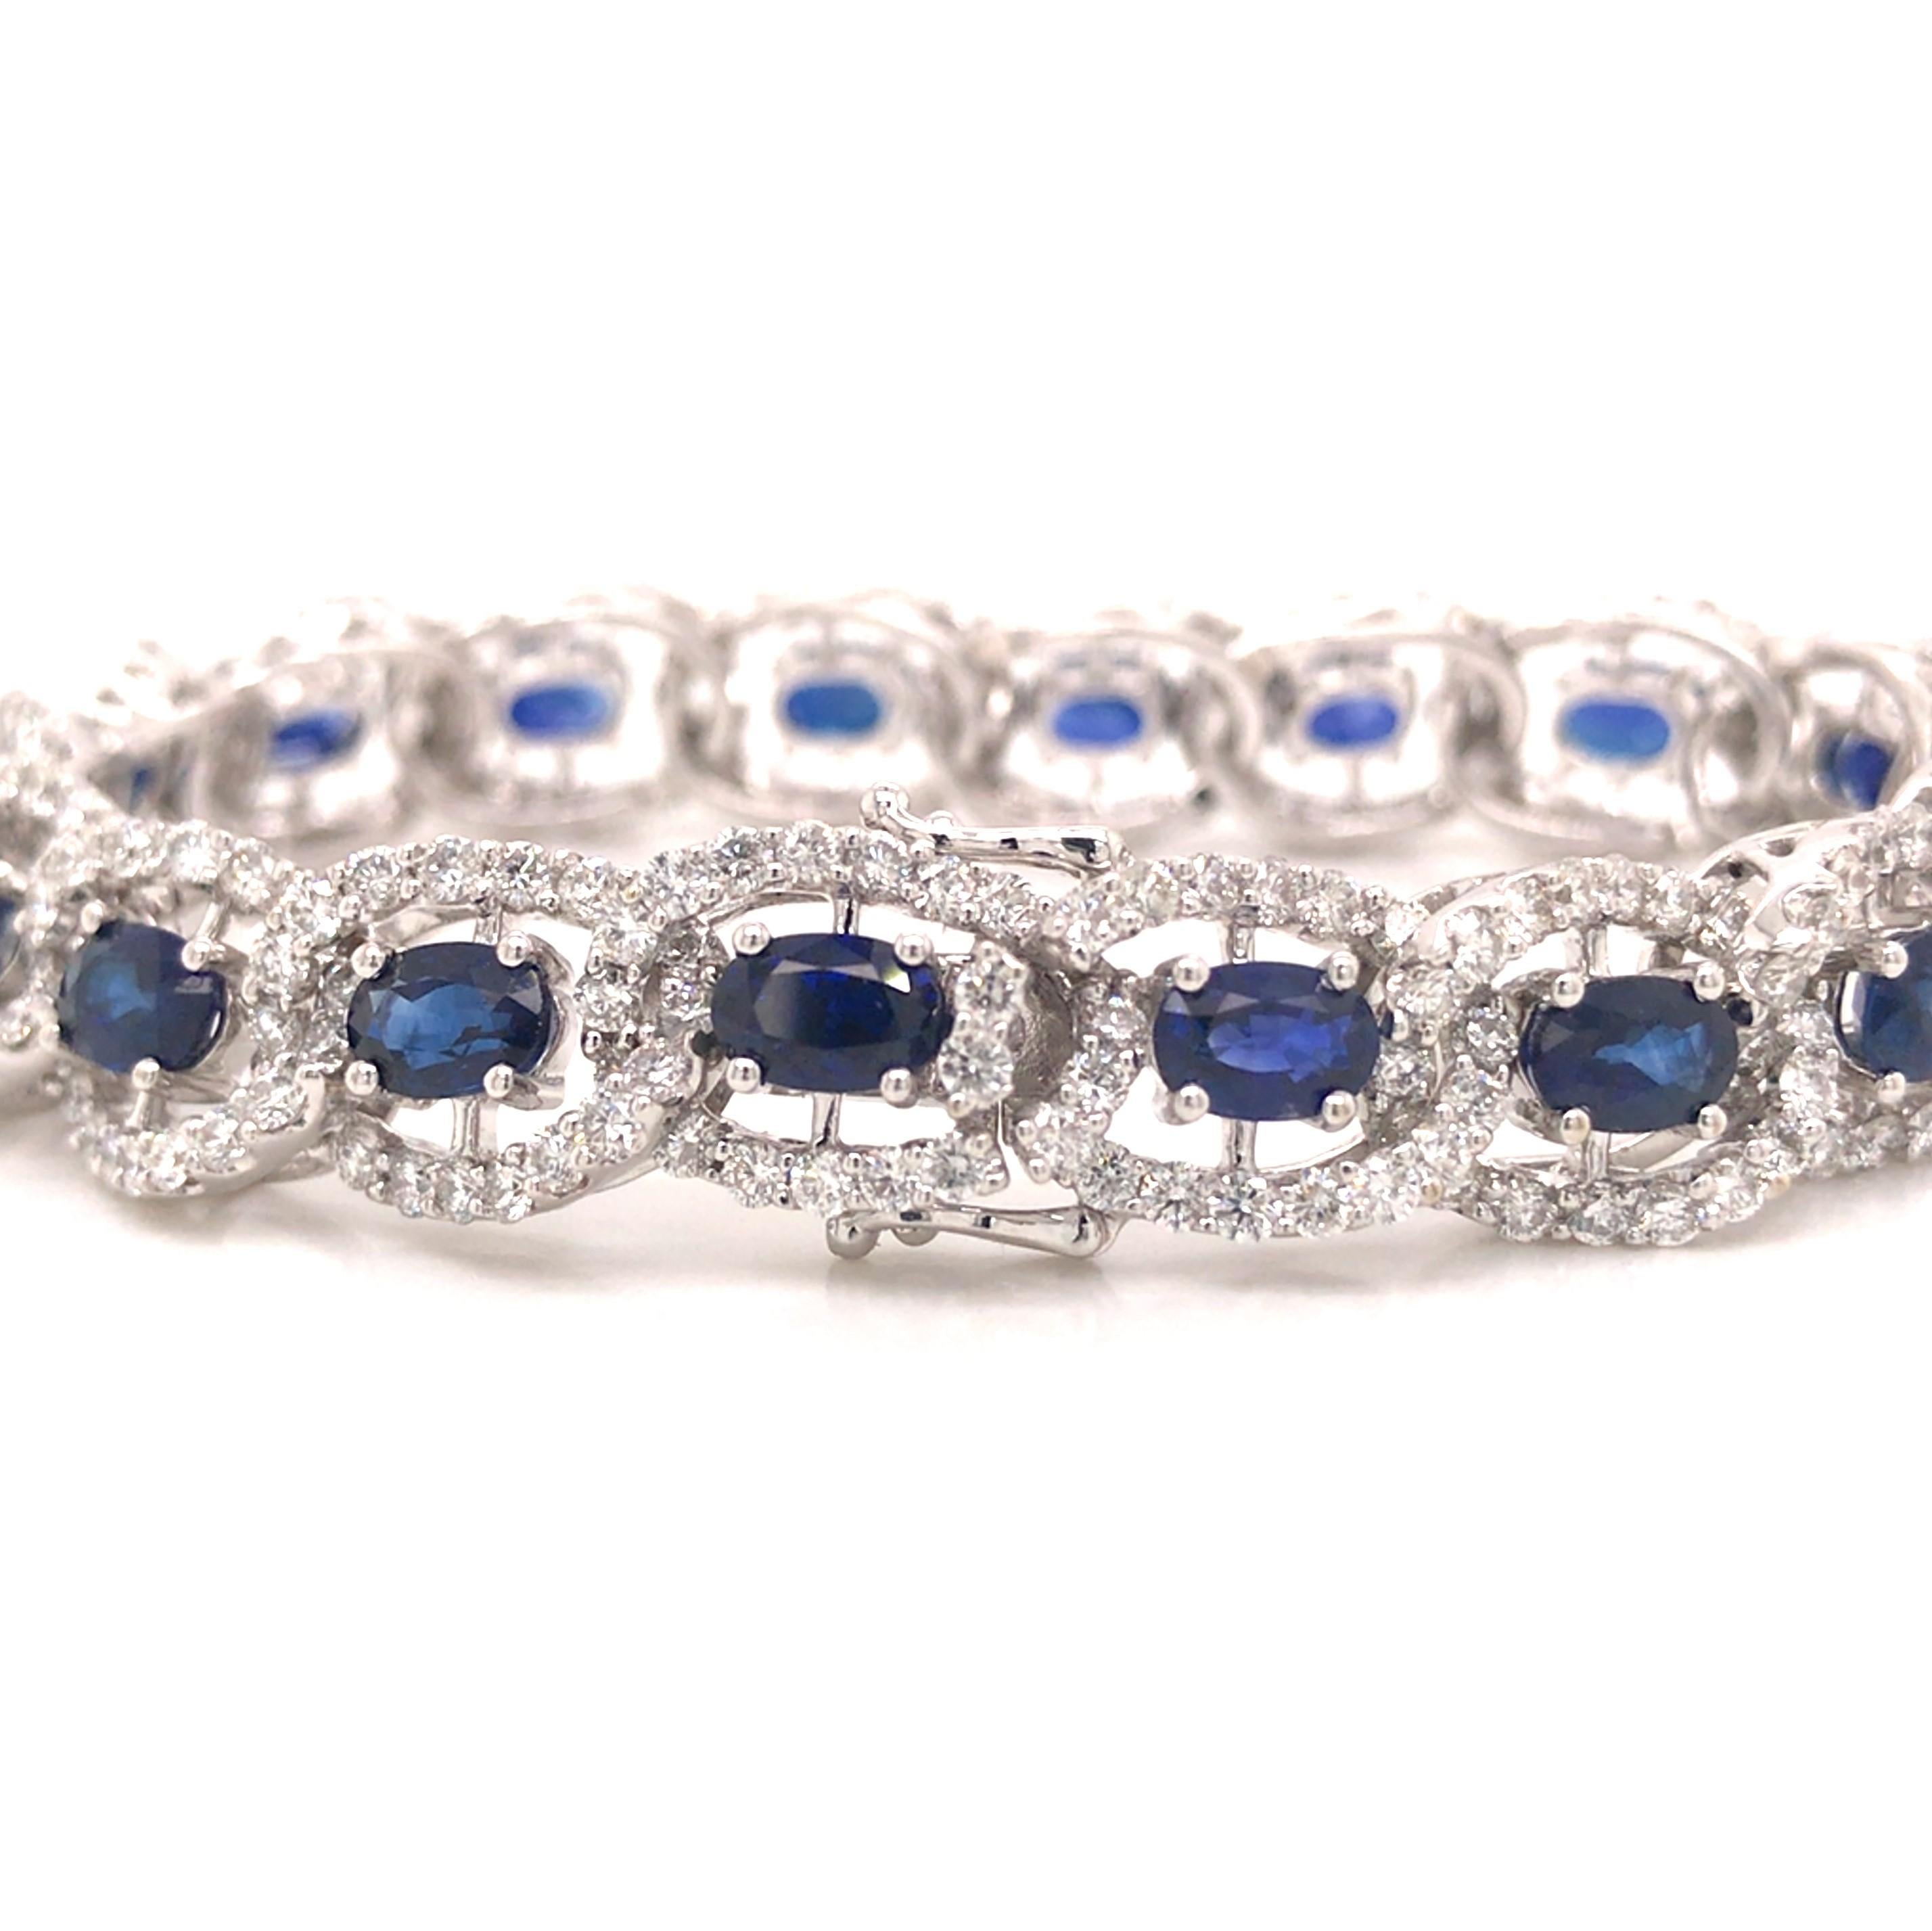 18K Diamond and Sapphire Link Tennis Bracelet White Gold In Excellent Condition For Sale In Boca Raton, FL